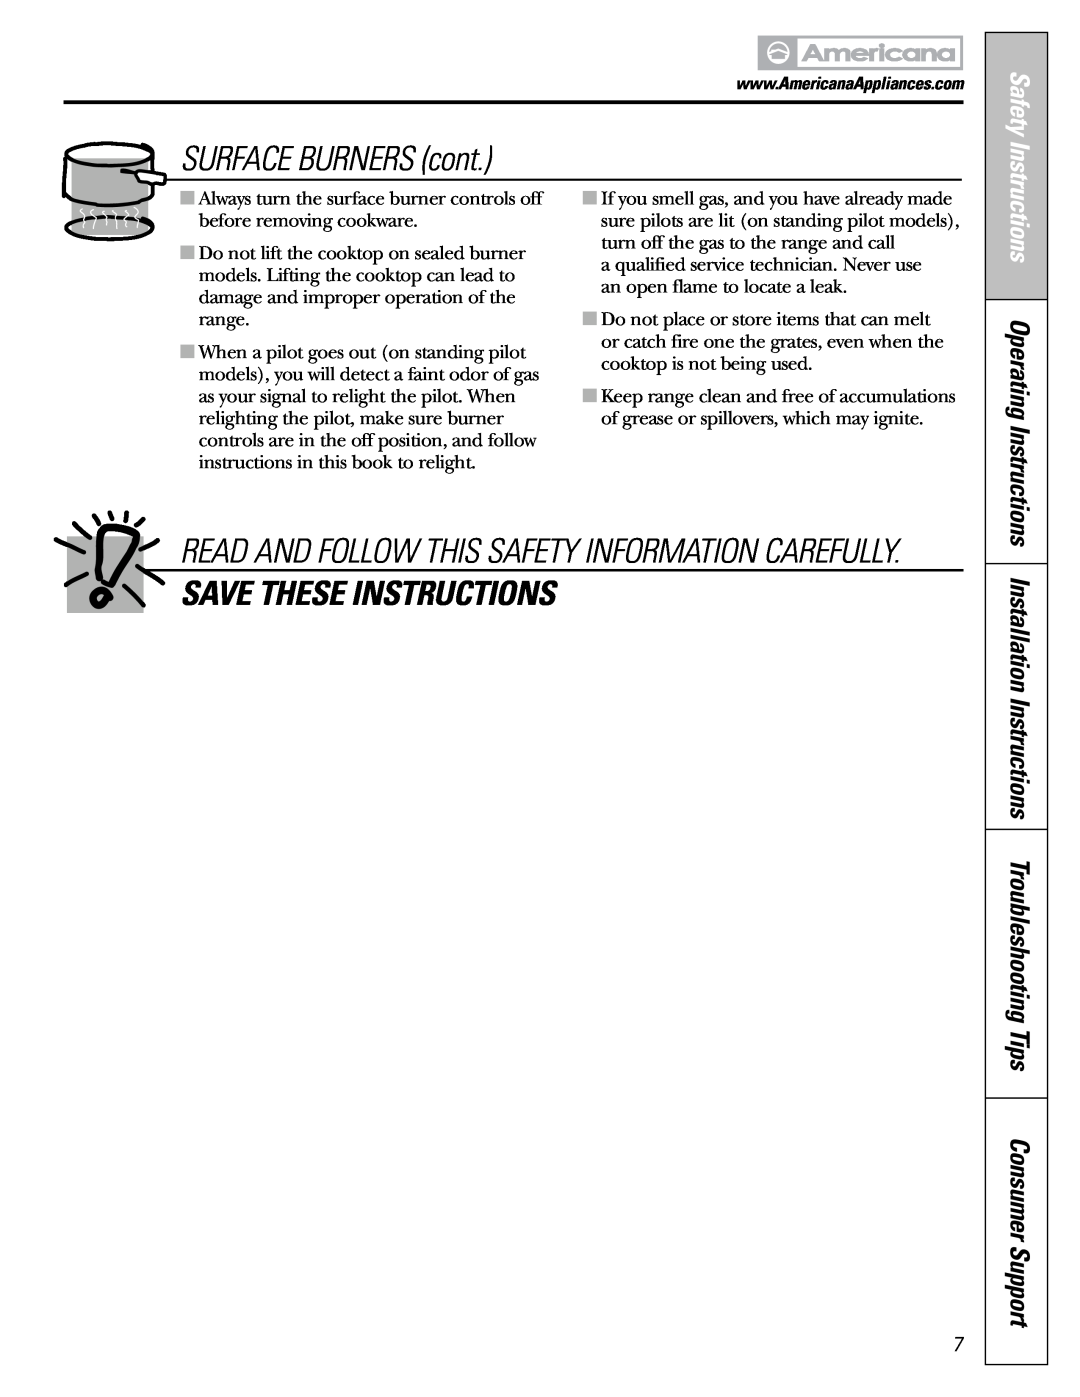 Americana Appliances AGBS300 SURFACE BURNERS cont, Save These Instructions, Safety, Instructions Operating Instructions 